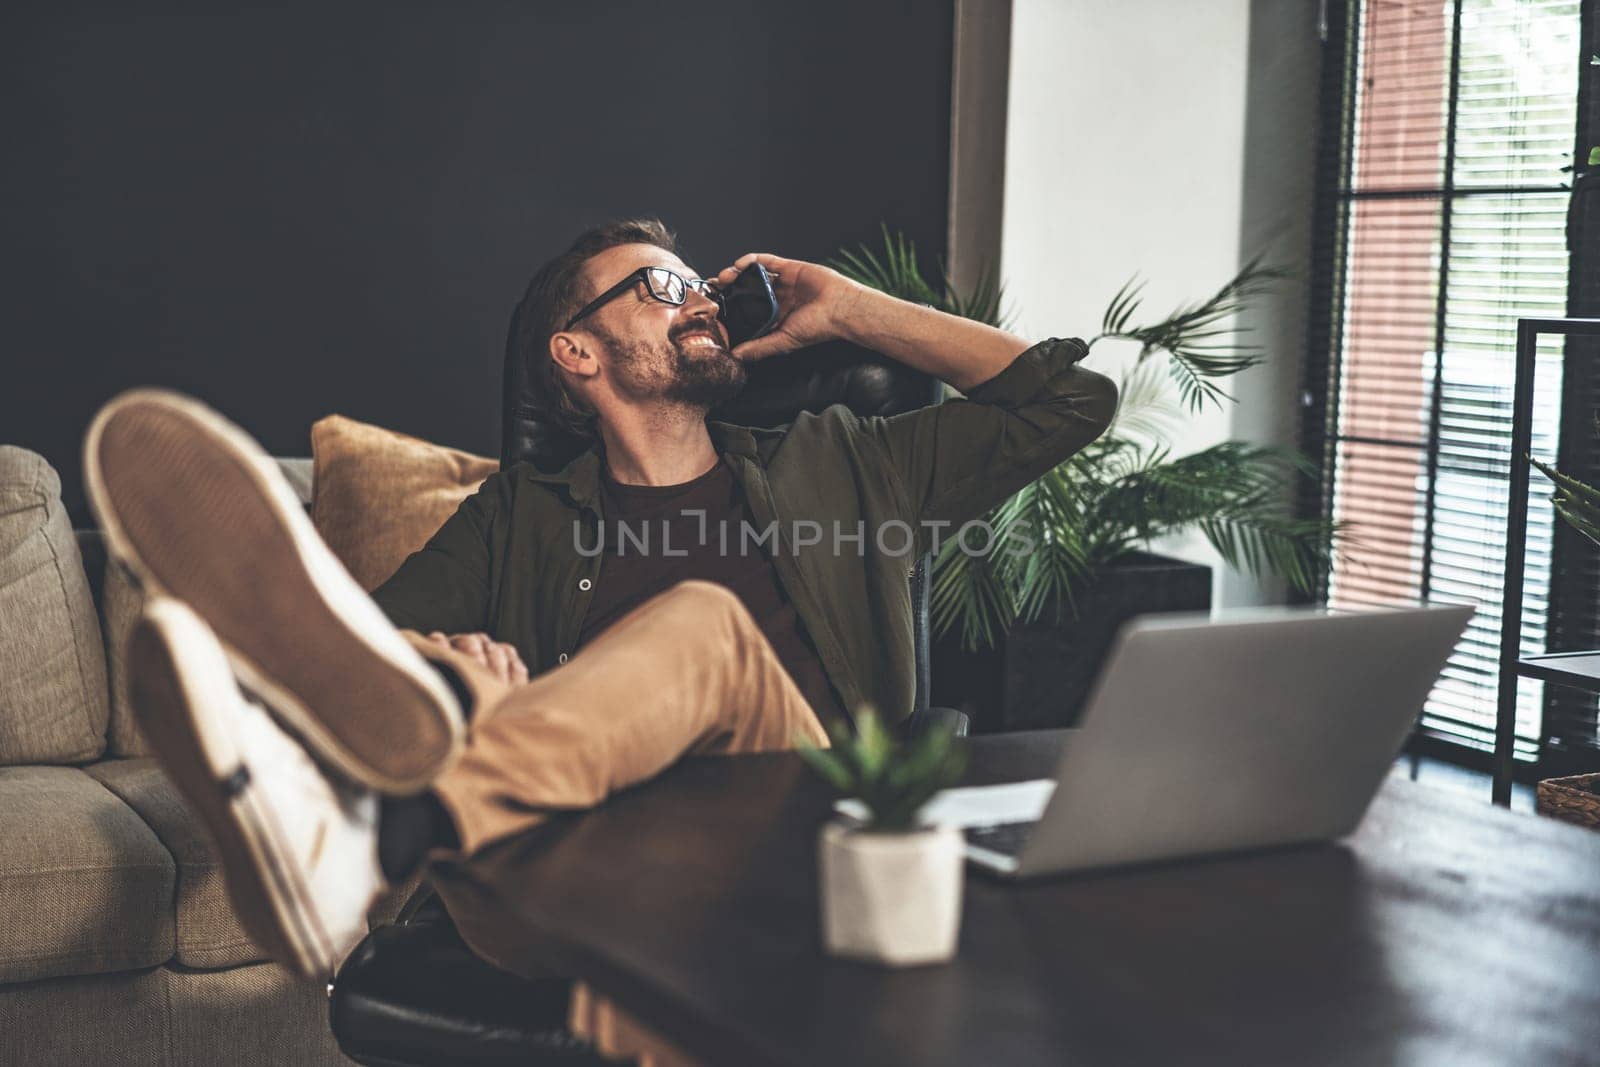 Happy and relaxed freelancer is working from home and taking phone call while sitting at desk with feet up like cowboy. He looks out window with smile on face, enjoying flexibility of remote work and comfort of his own home. by LipikStockMedia